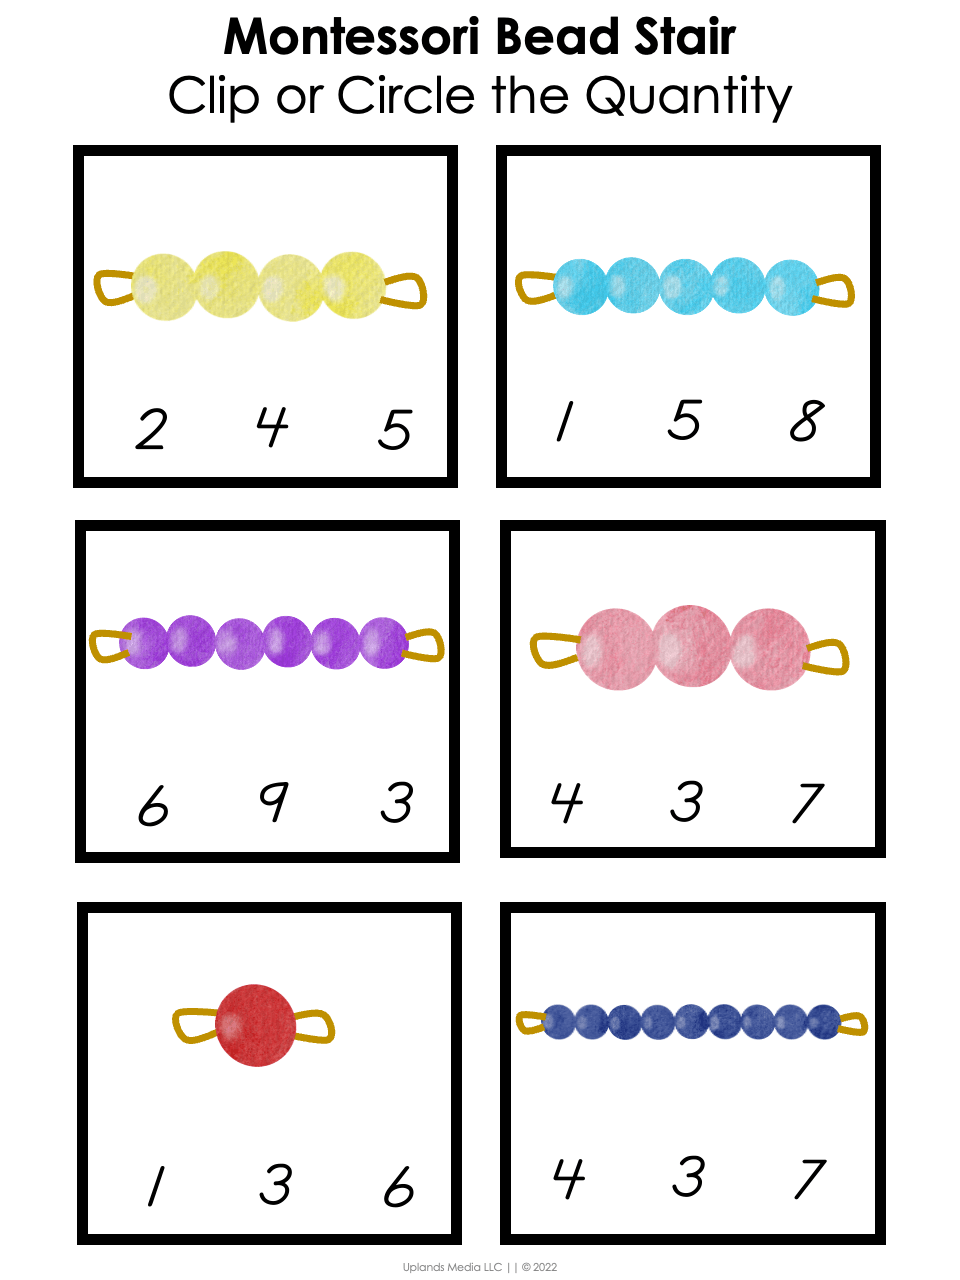 [Math] Bead Stair and Ten & Teen Board - Printables by Carrots Are Orange